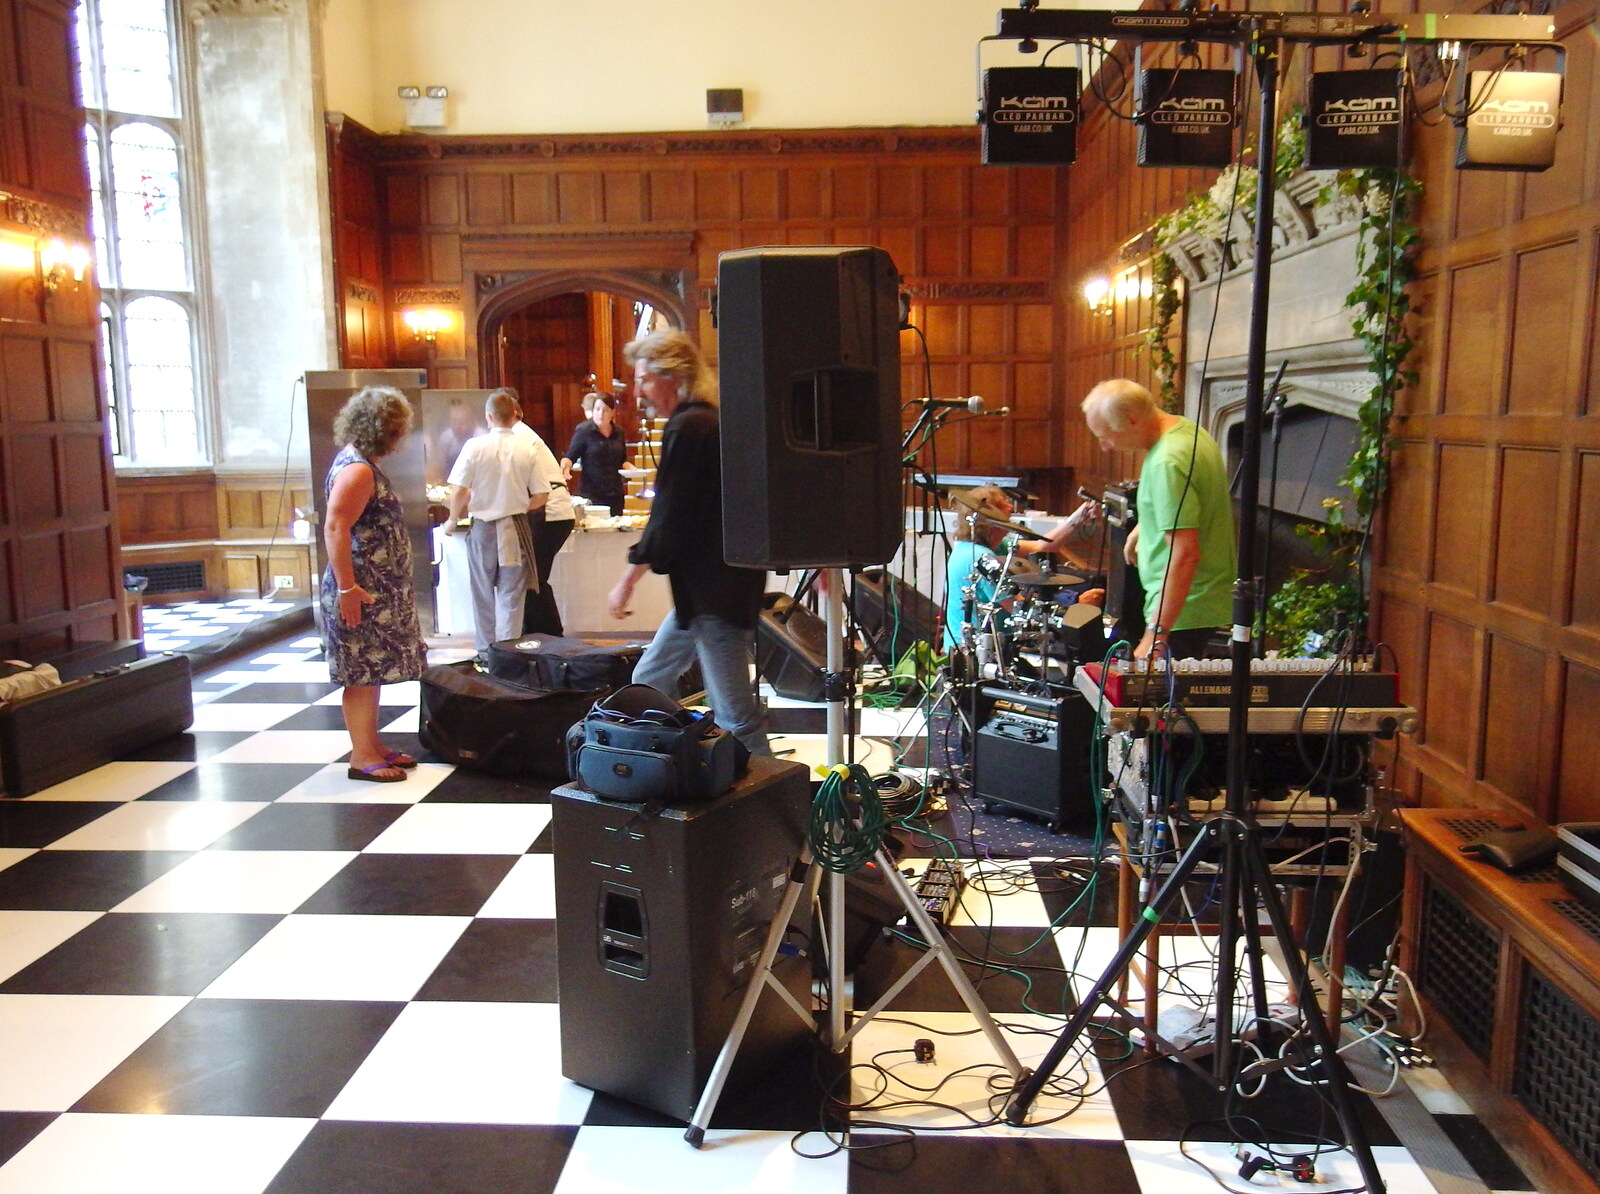 We're setting up at the same time as the caterers from The BBs at Hengrave Hall, Hengrave, Suffolk - 18th August 2013